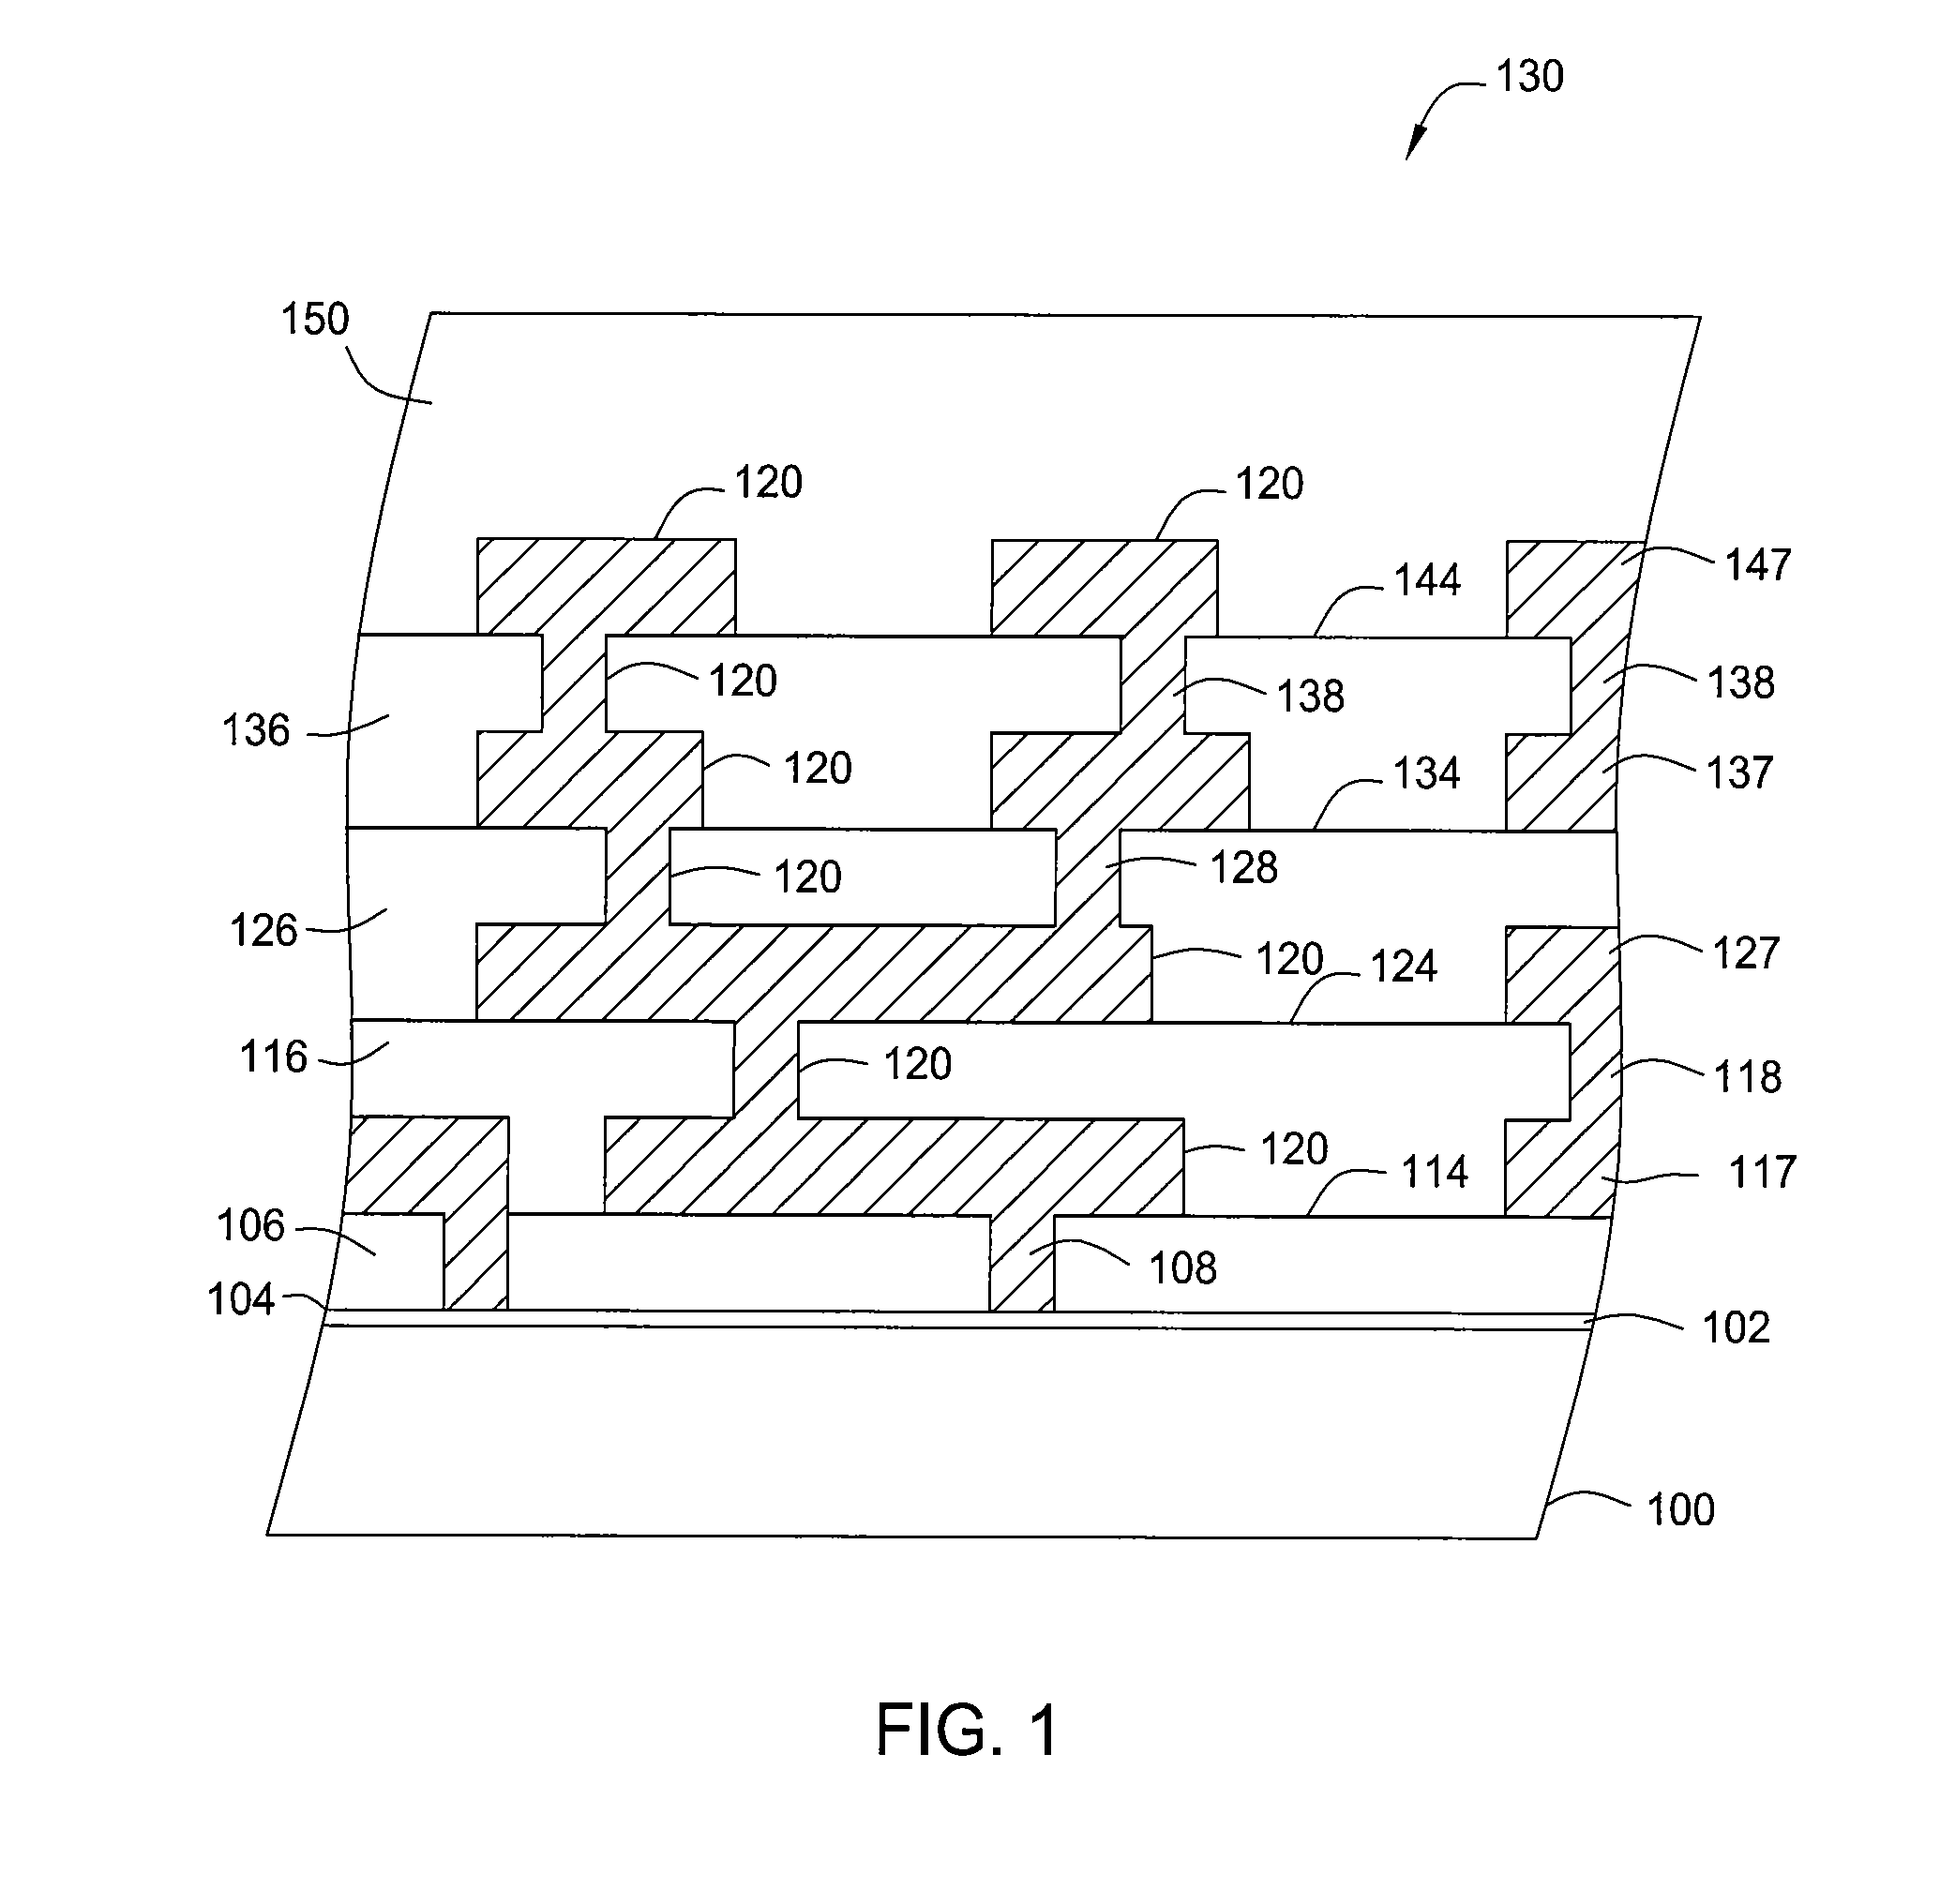 Method for improving electromigration lifetime of copper interconnection by extended post anneal